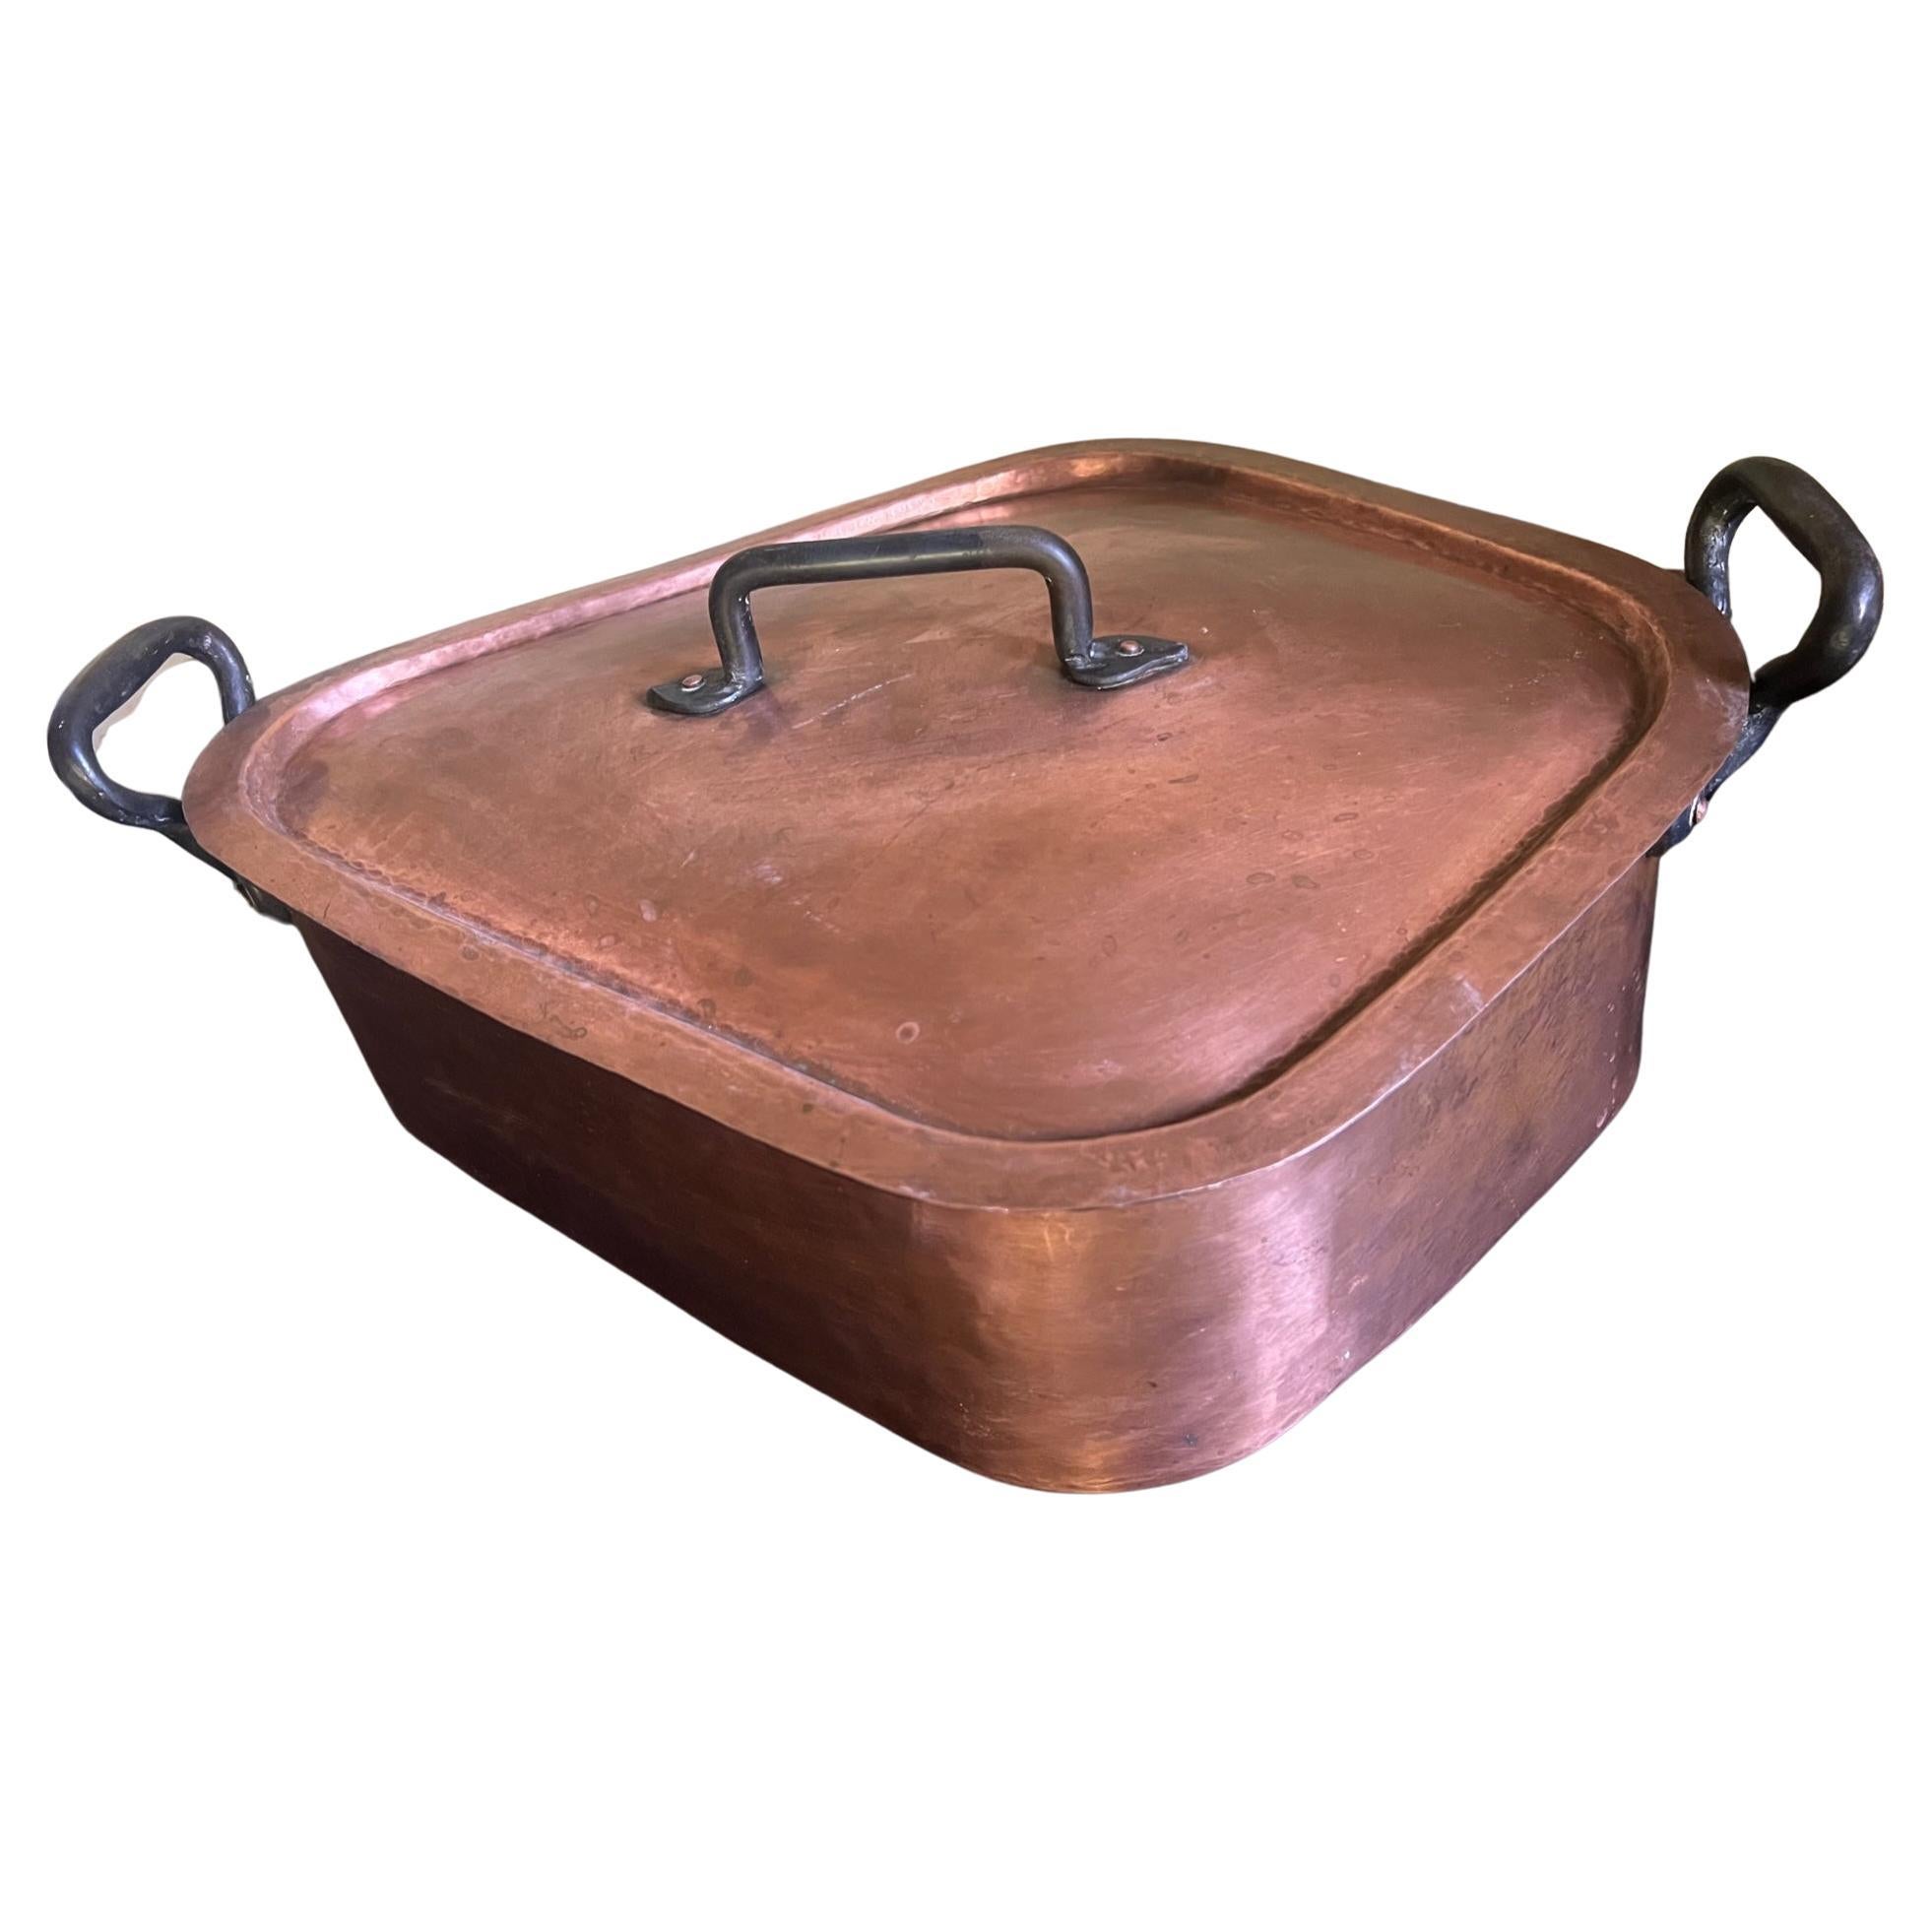 Pierre Vergnes Copper Turbot fish pan made in Southwest France. Sometimes called a turbotiere, this heirloom quality pan is crafted with 2mm copper and a tin lining offering evenly controlled heat conductivity and distribution. It comes with three